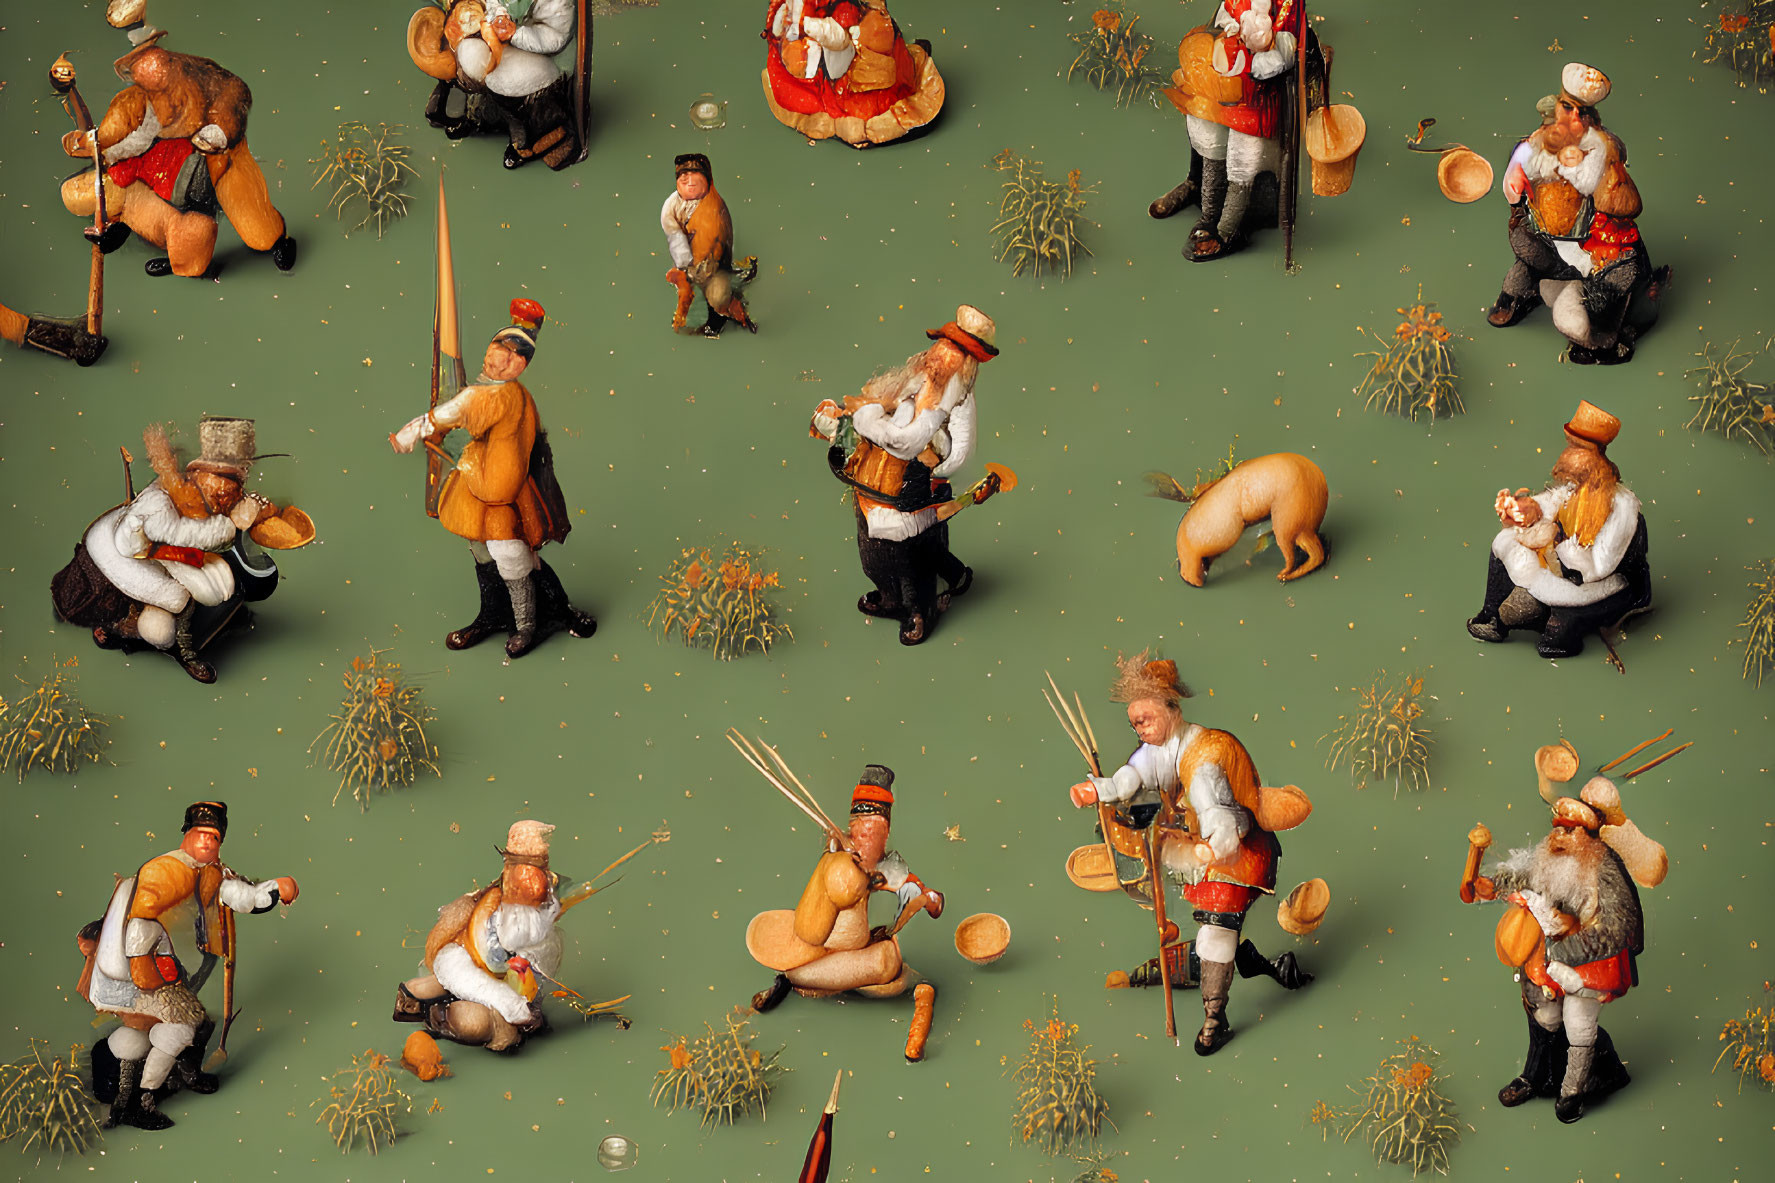 Collection of Santa Claus miniature figures playing musical instruments on green background